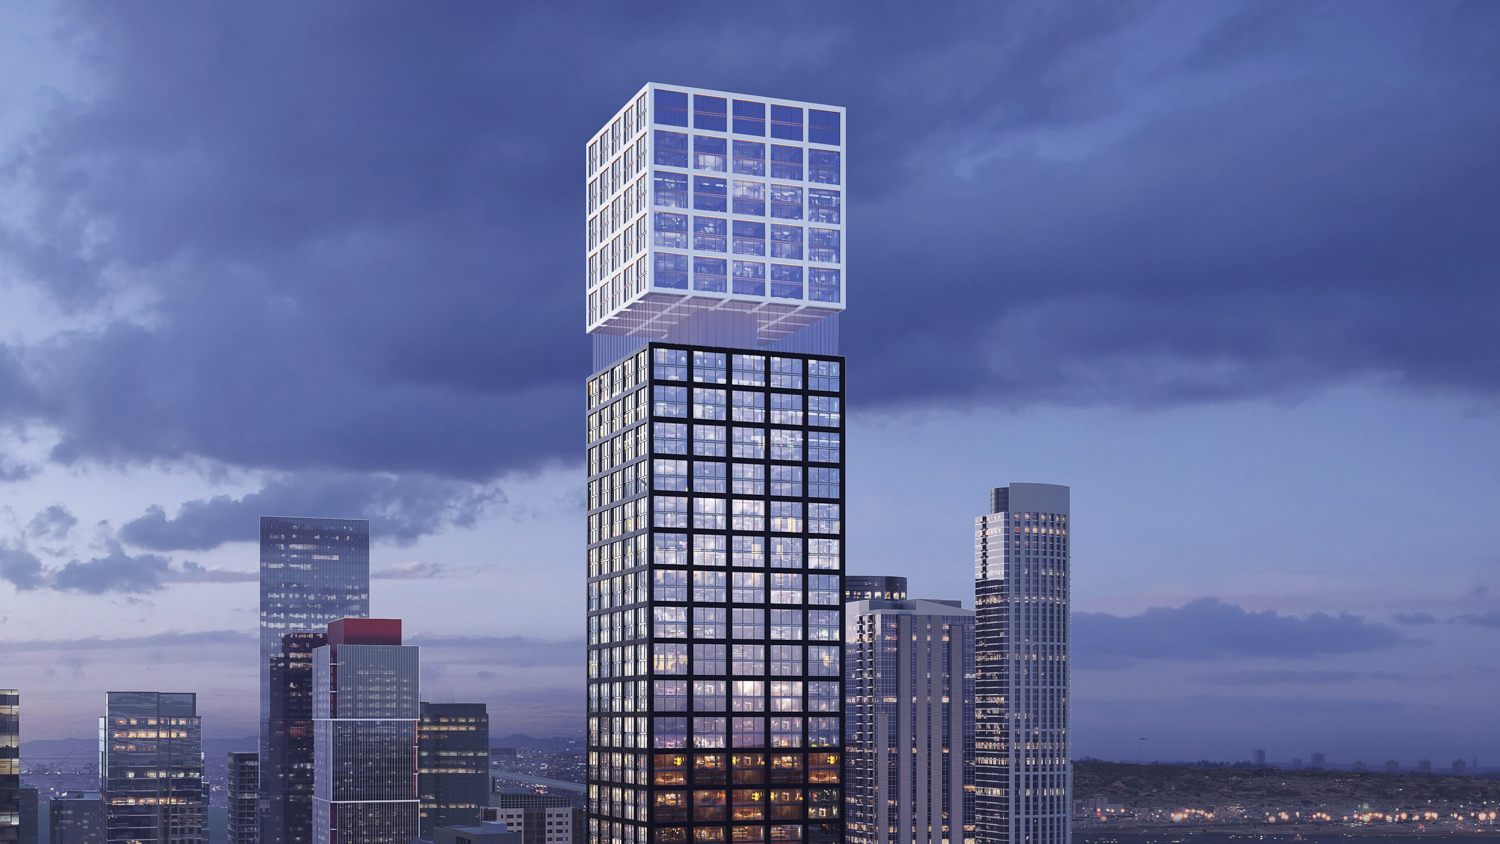 Close-up of The Cube on 620 Folsom Street, rendering by Arquitectonica